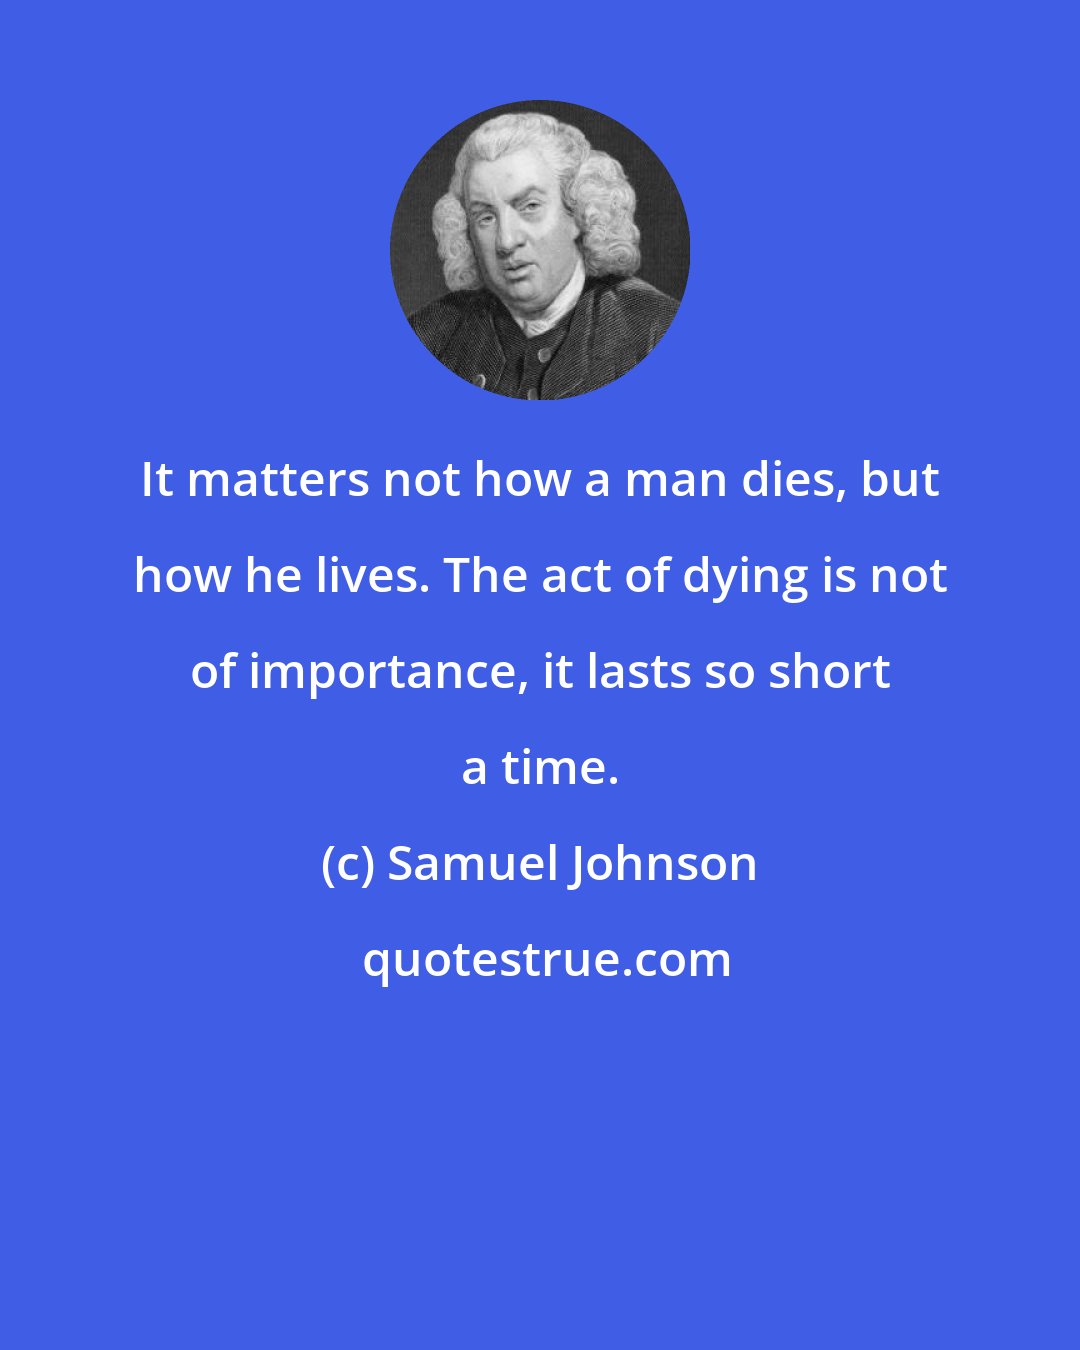 Samuel Johnson: It matters not how a man dies, but how he lives. The act of dying is not of importance, it lasts so short a time.